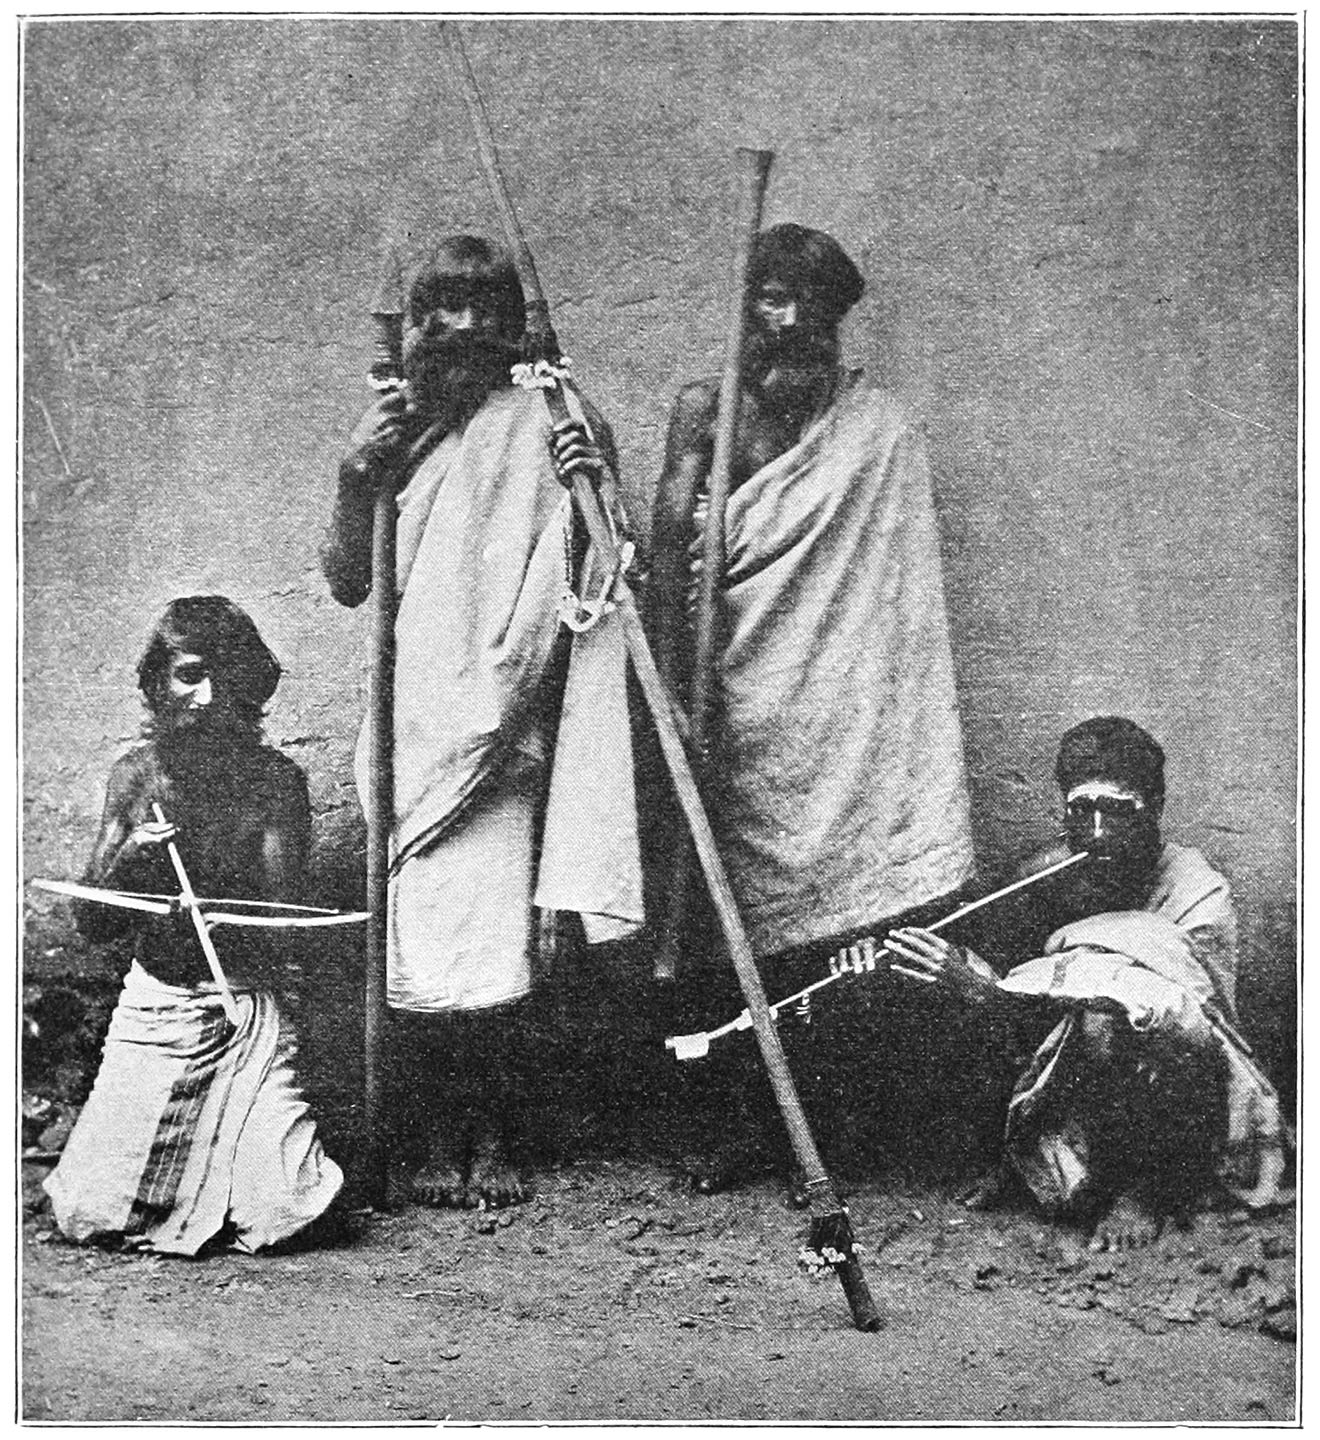 FIG. 67 (FROM BREEKS).—THE FIRST MAN ON THE LEFT IS HOLDING A BOW AND ARROW; THE SECOND A CLUB (PROBABLY THE ‘NANMAKUD’) IN HIS RIGHT HAND, AND THE ‘TADRI’ IN HIS LEFT; THE THIRD MAN IS CARRYING A CLUB, AND THE FOURTH MAN IS PLAYING THE ‘BUGURI.’